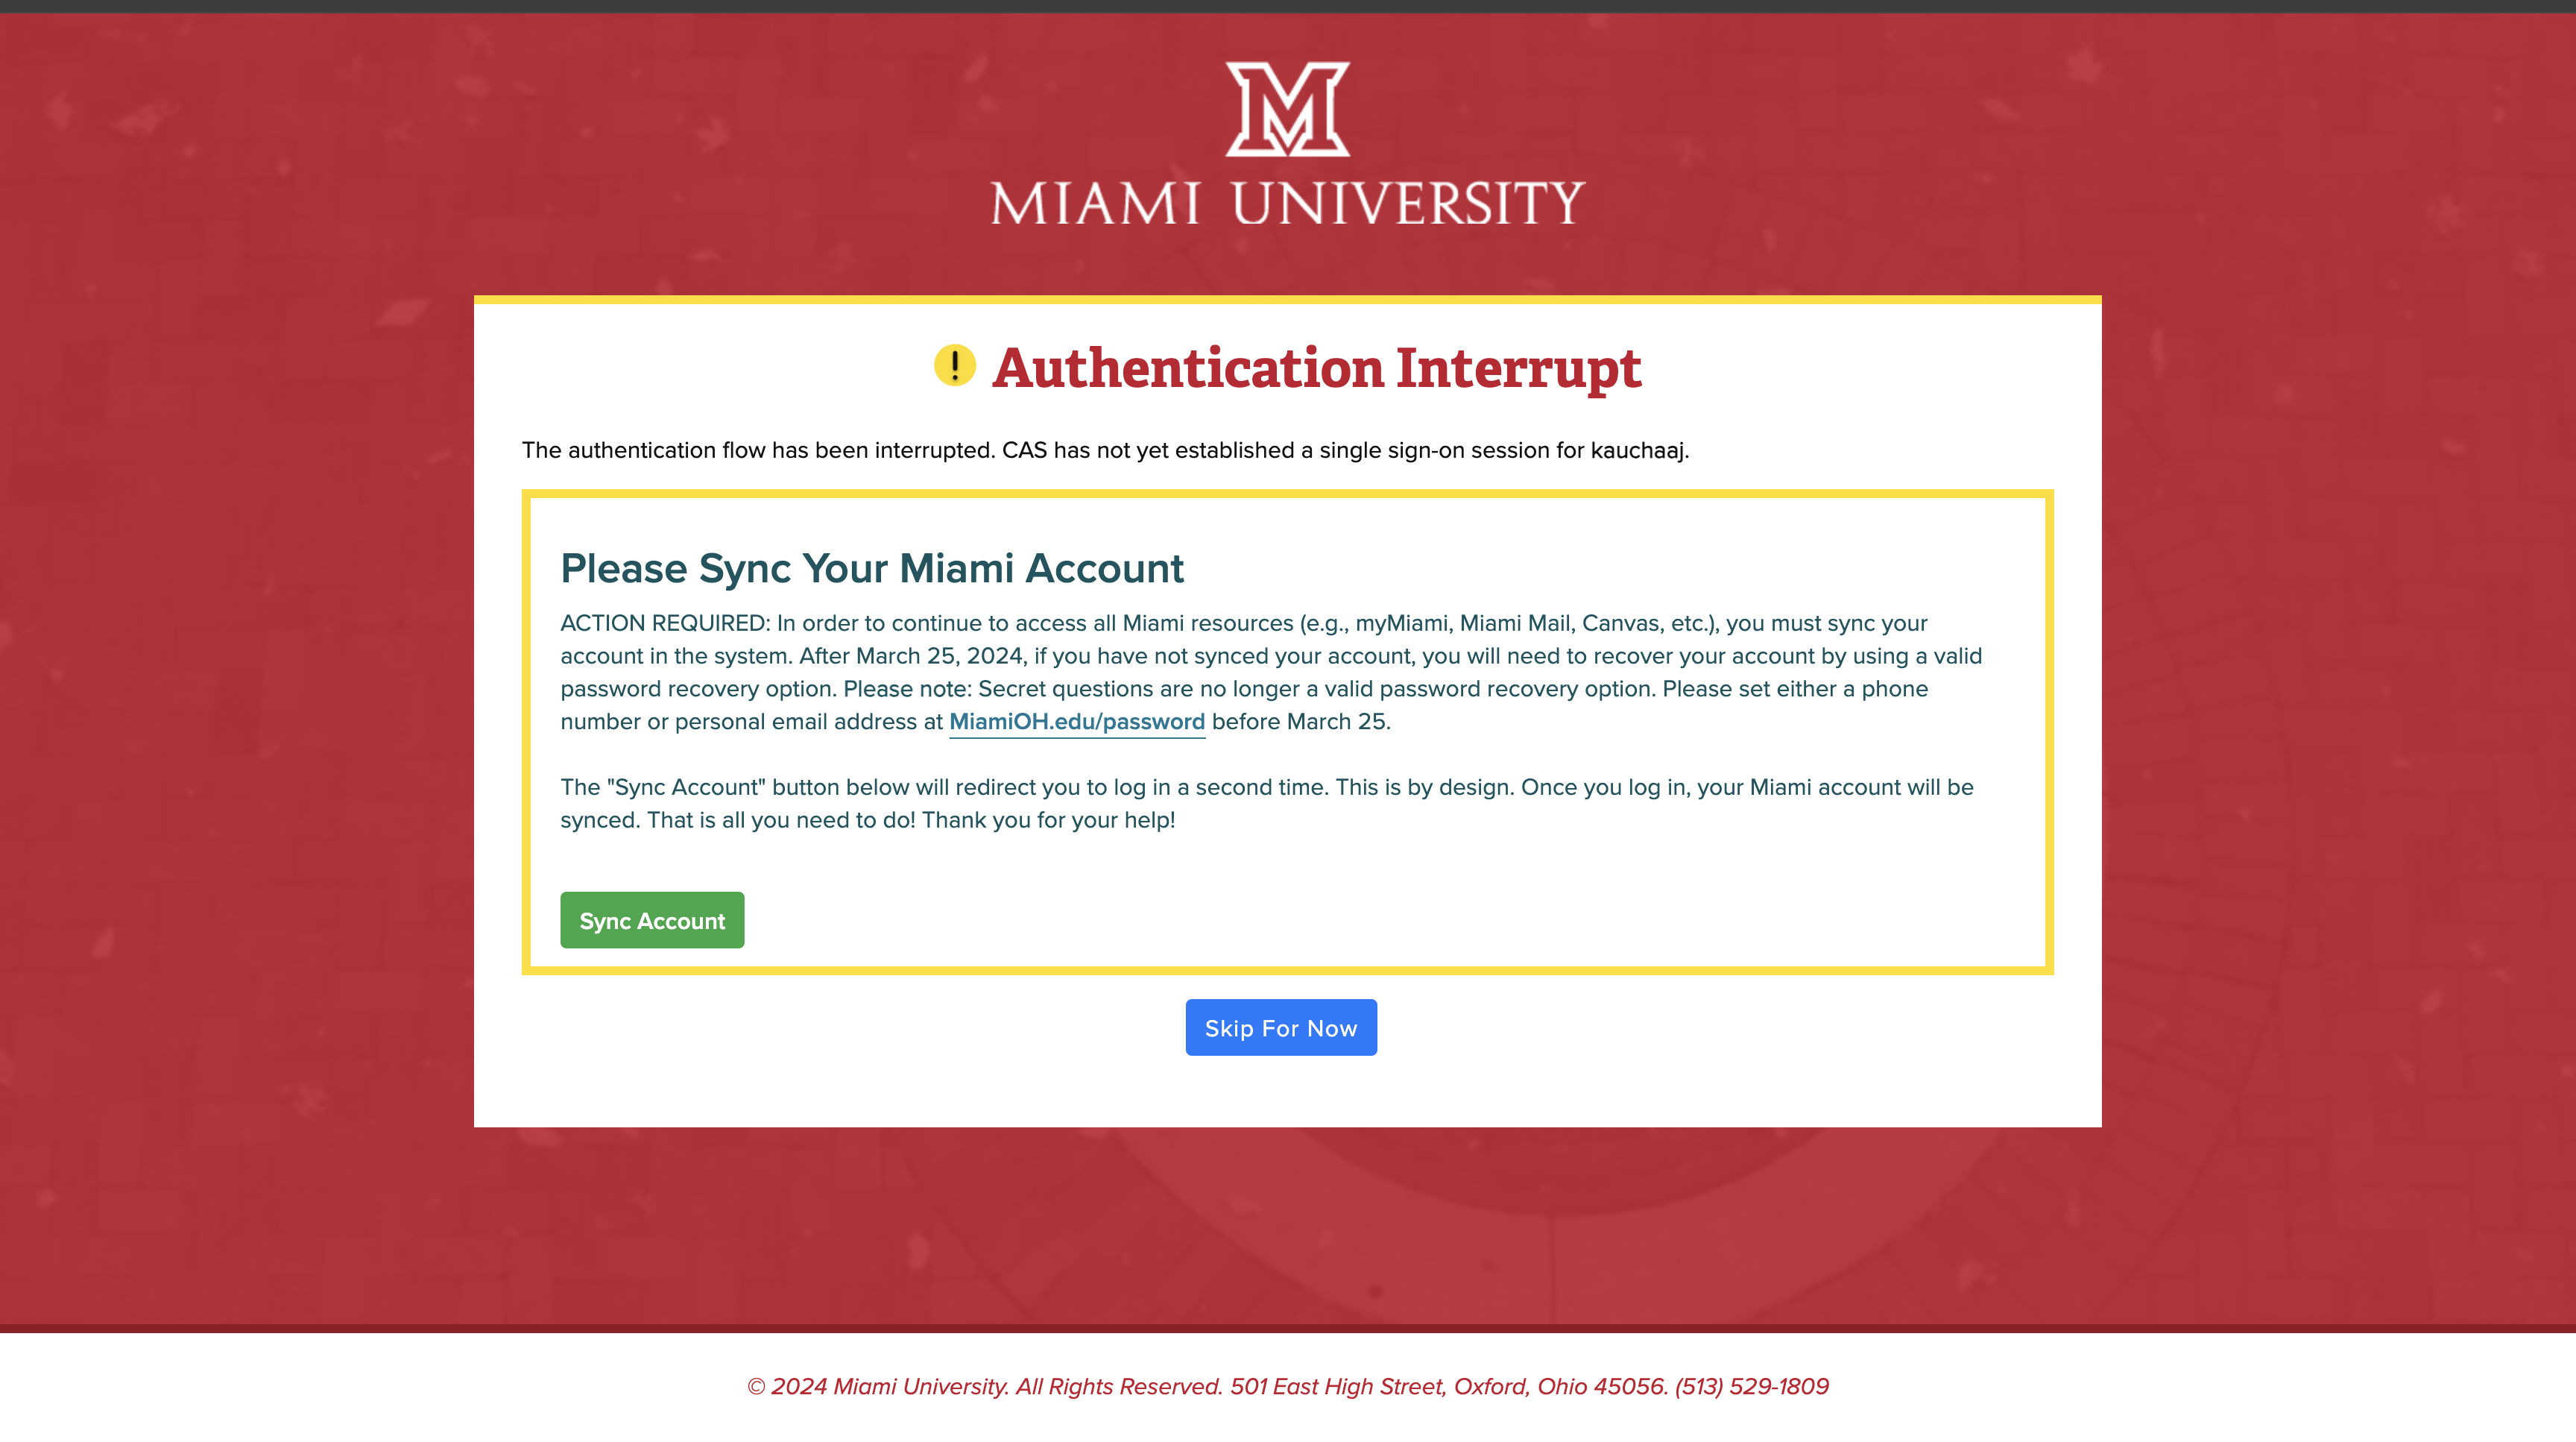 ACTION REQUIRED: In order to continue to access all Miami resources (e.g., myMiami, Miami Mail, Canvas, etc.), you must sync your account in the system. After March 25, 2024, if you have not synced your account, you will need to recover your account by using a valid password recovery option. Please note: Secret questions are no longer a valid password recovery option. Please set either a phone number or personal email address at MiamiOH.edu/password before March 25.  The “Sync Account” button below will redirect you to log in a second time. This is by design. Once you log in, your Miami account will be synced. That is all you need to do! Thank you for your help!